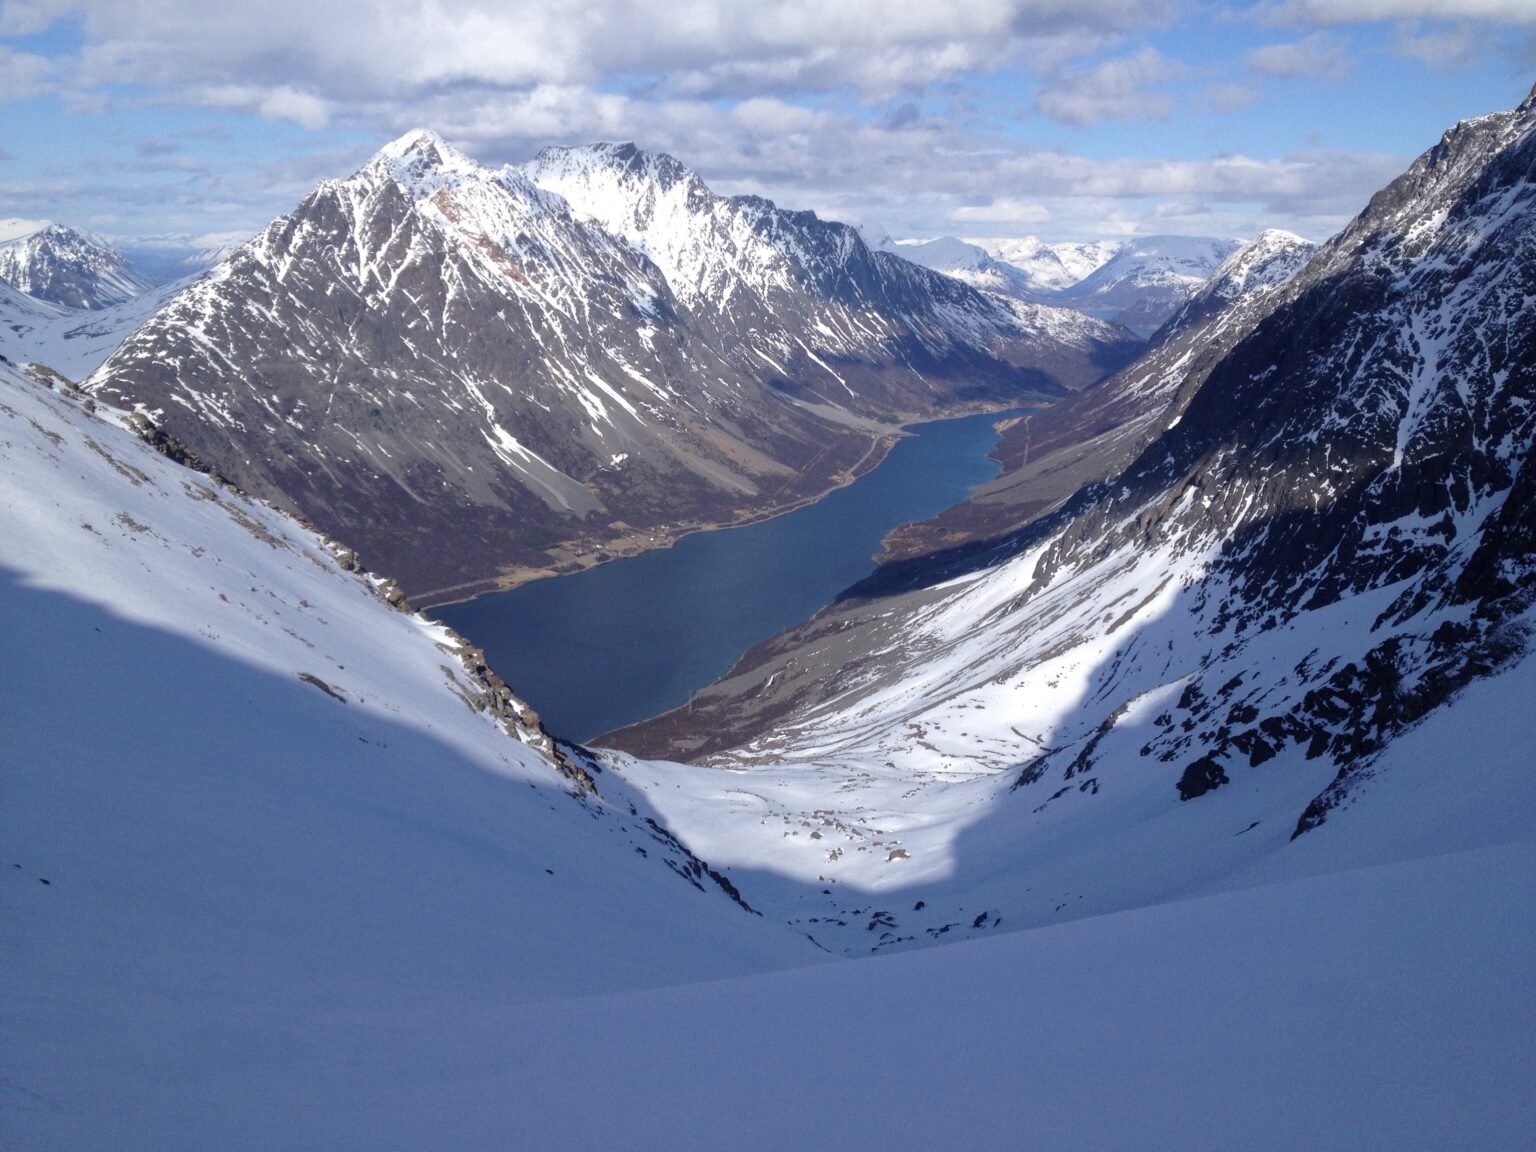 Looking down towards one of many fjords in the Lyngen Alps of Norway